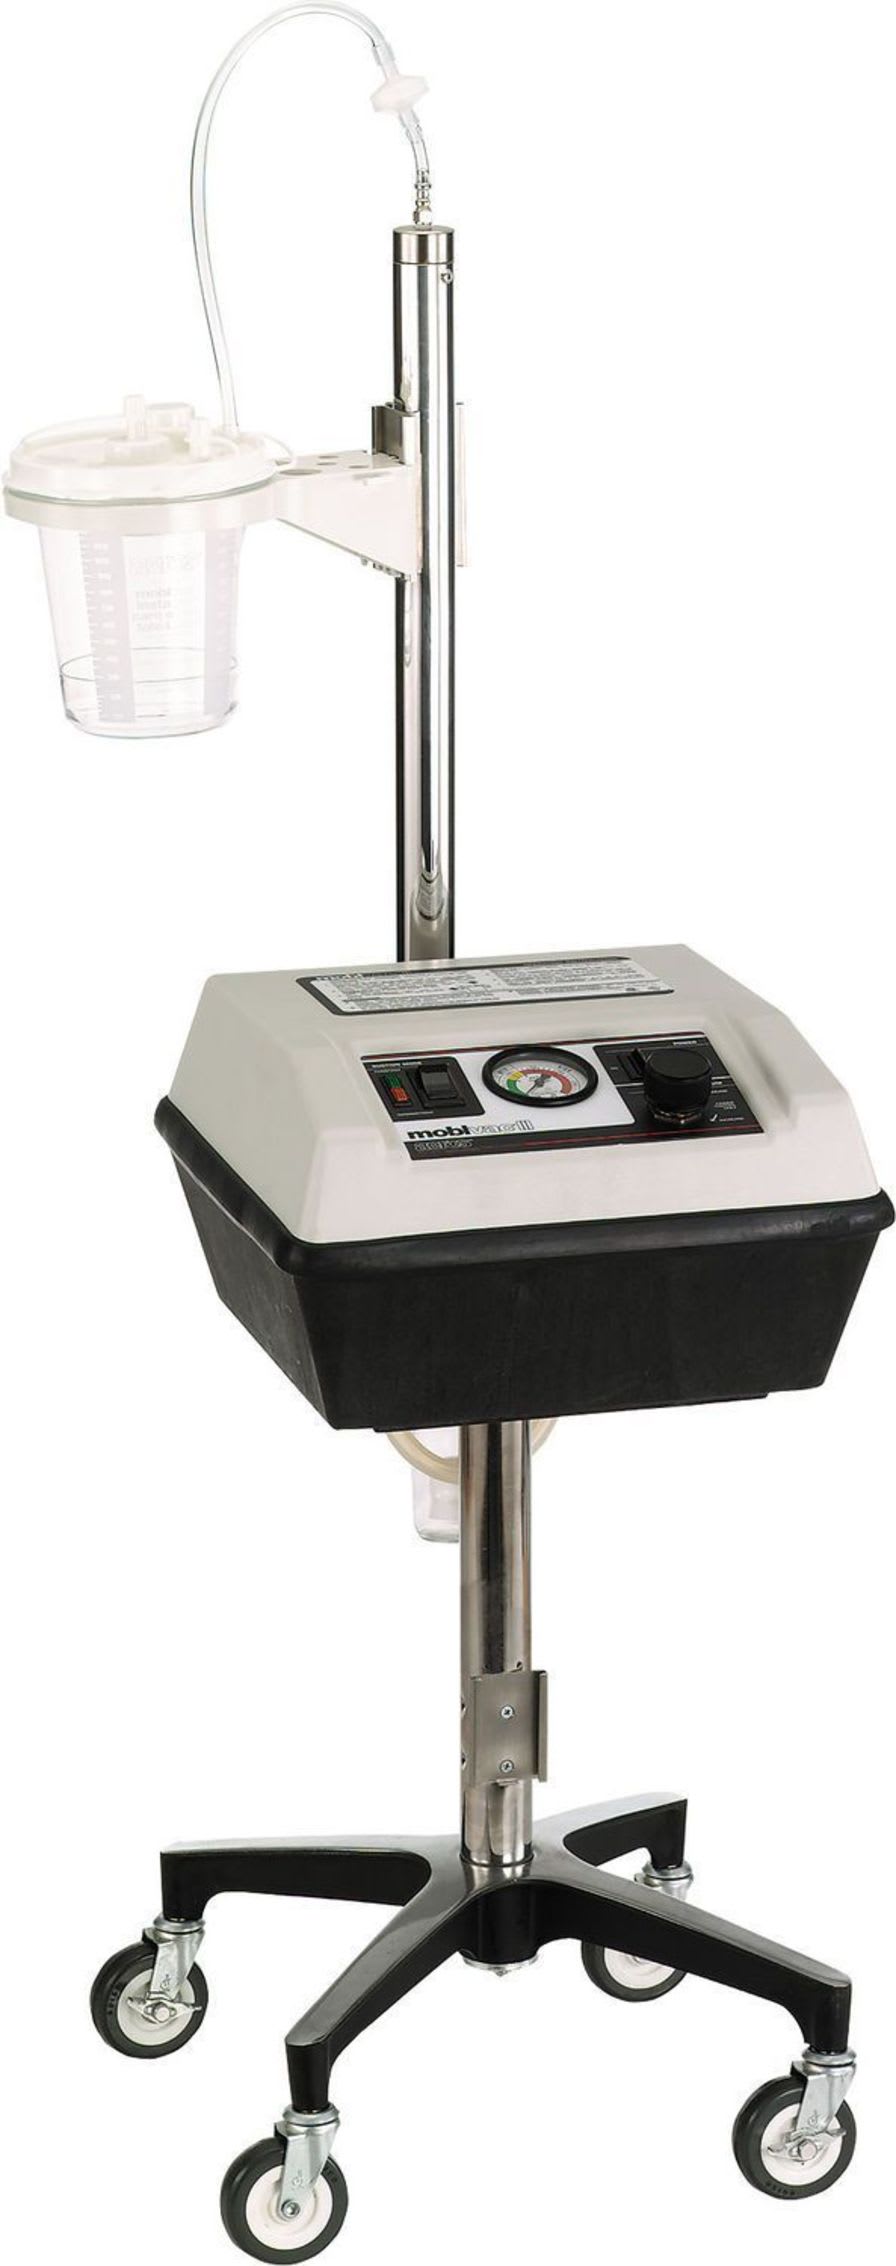 Electric surgical suction pump / on casters Moblvac III Ohio Medical